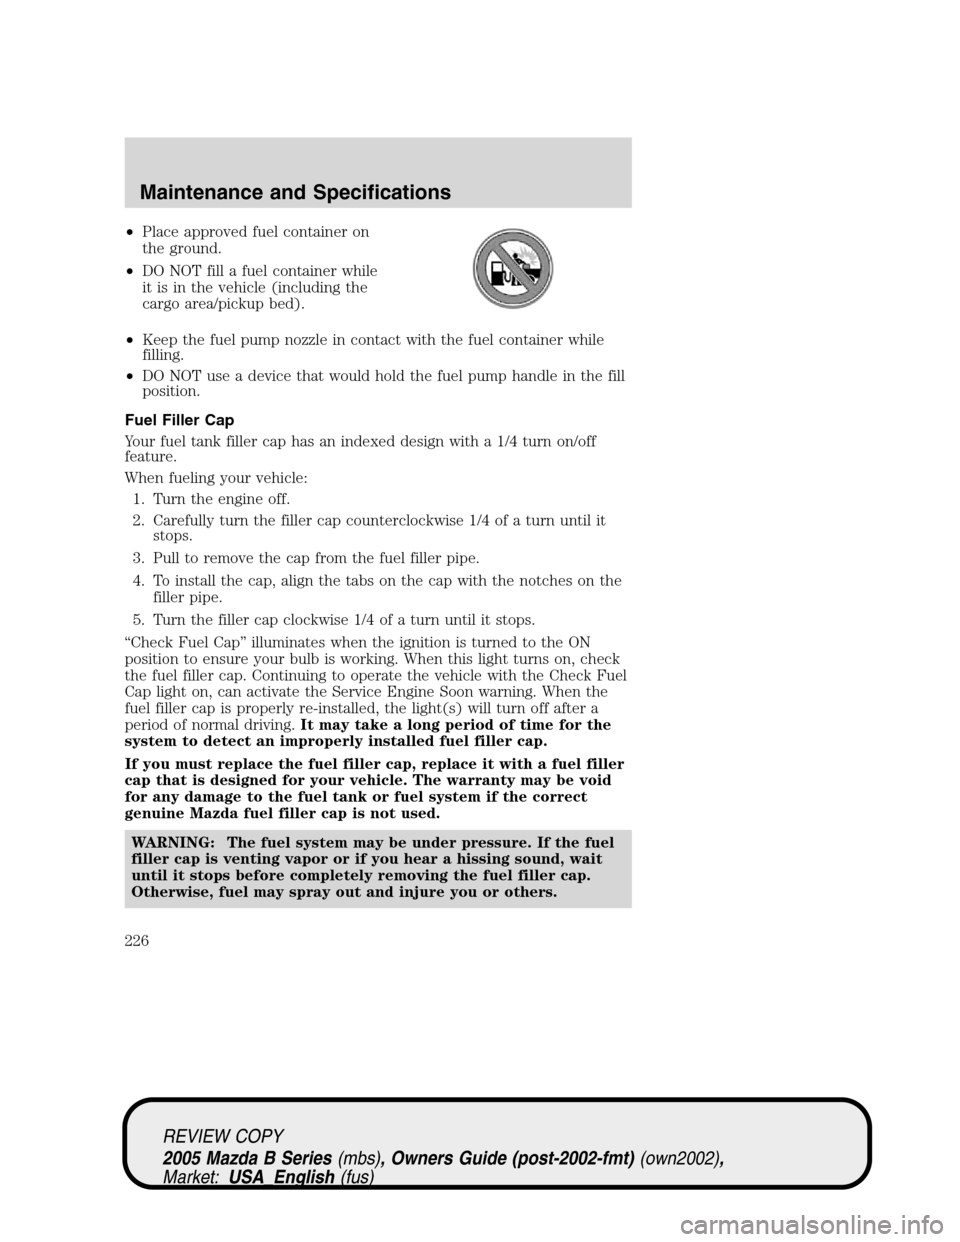 MAZDA MODEL B2300 TRUCK 2005  Owners Manual (in English) •Place approved fuel container on
the ground.
•DO NOT fill a fuel container while
it is in the vehicle (including the
cargo area/pickup bed).
•Keep the fuel pump nozzle in contact with the fuel 